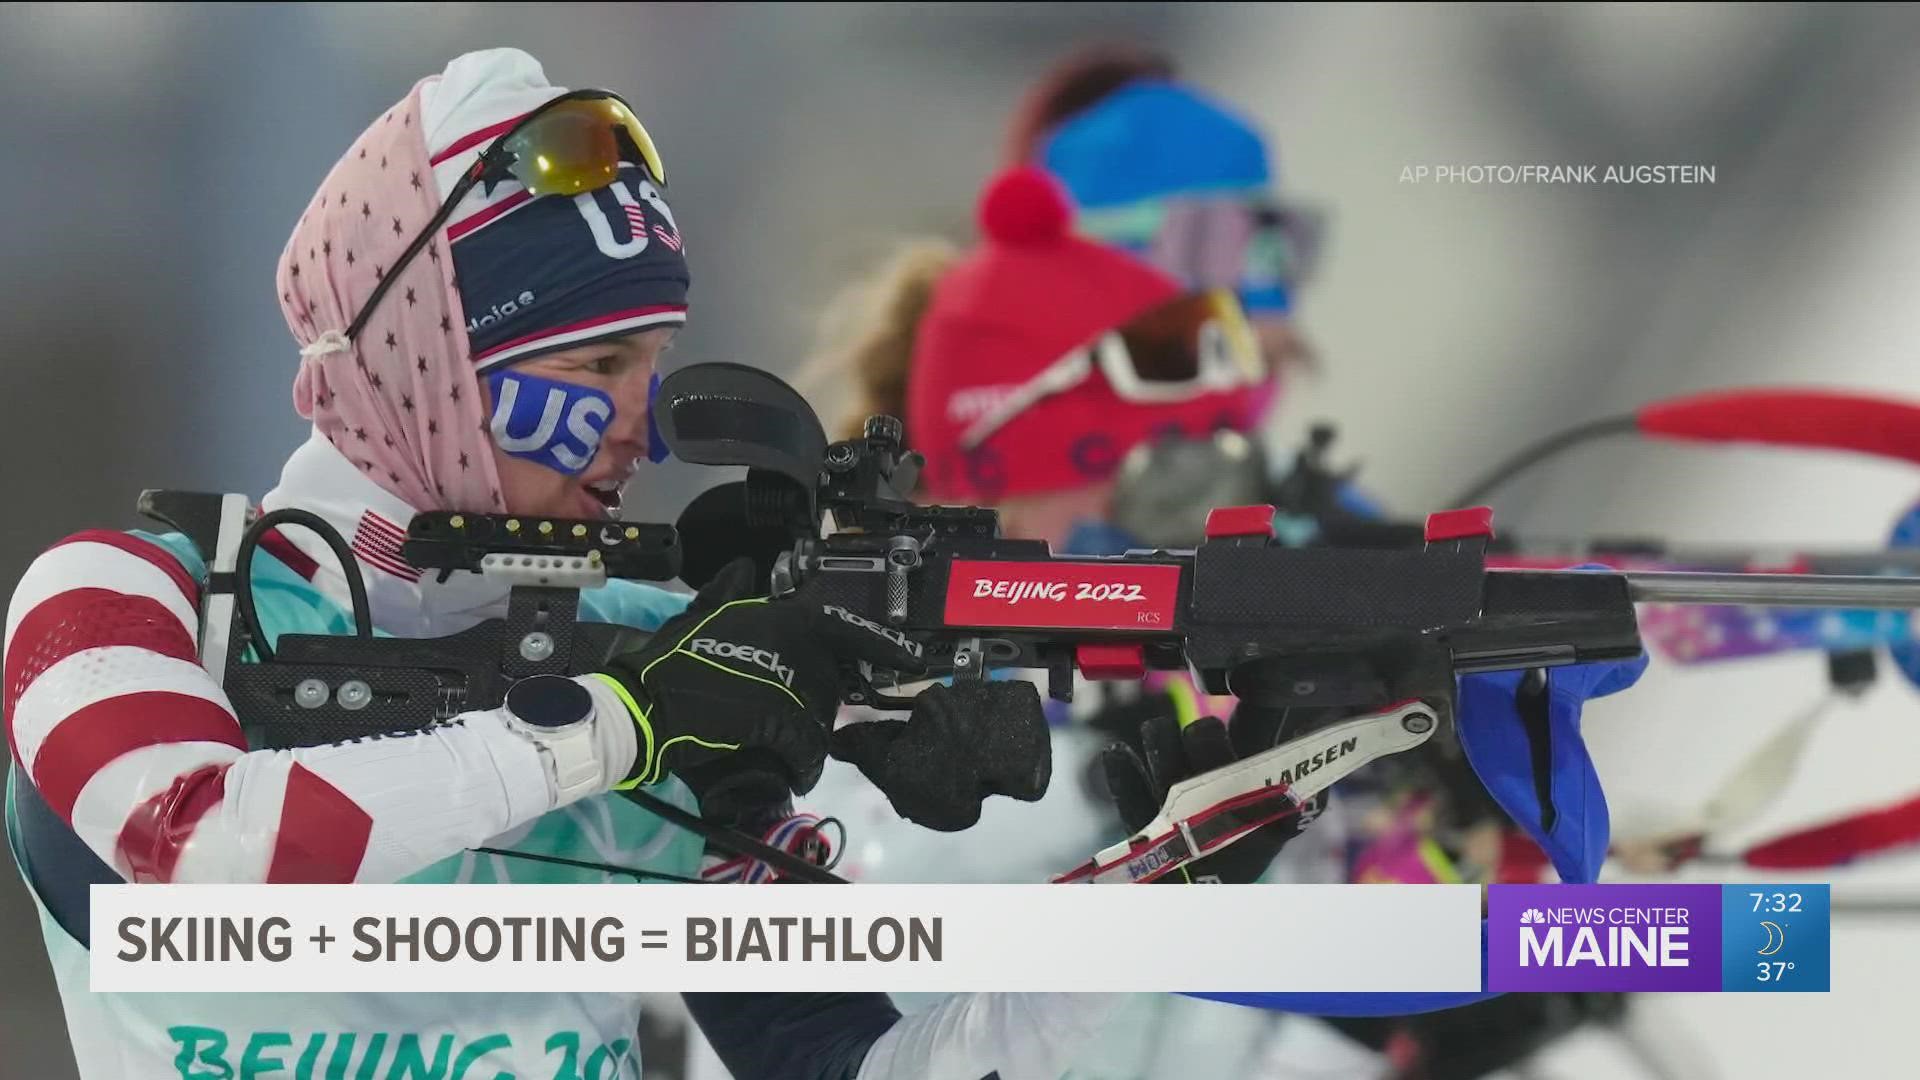 Biathlon combines cross-country skiing and rifle shooting. Egan competed in Pyeongchang in 2018, and has been honing her skills with the rifle.